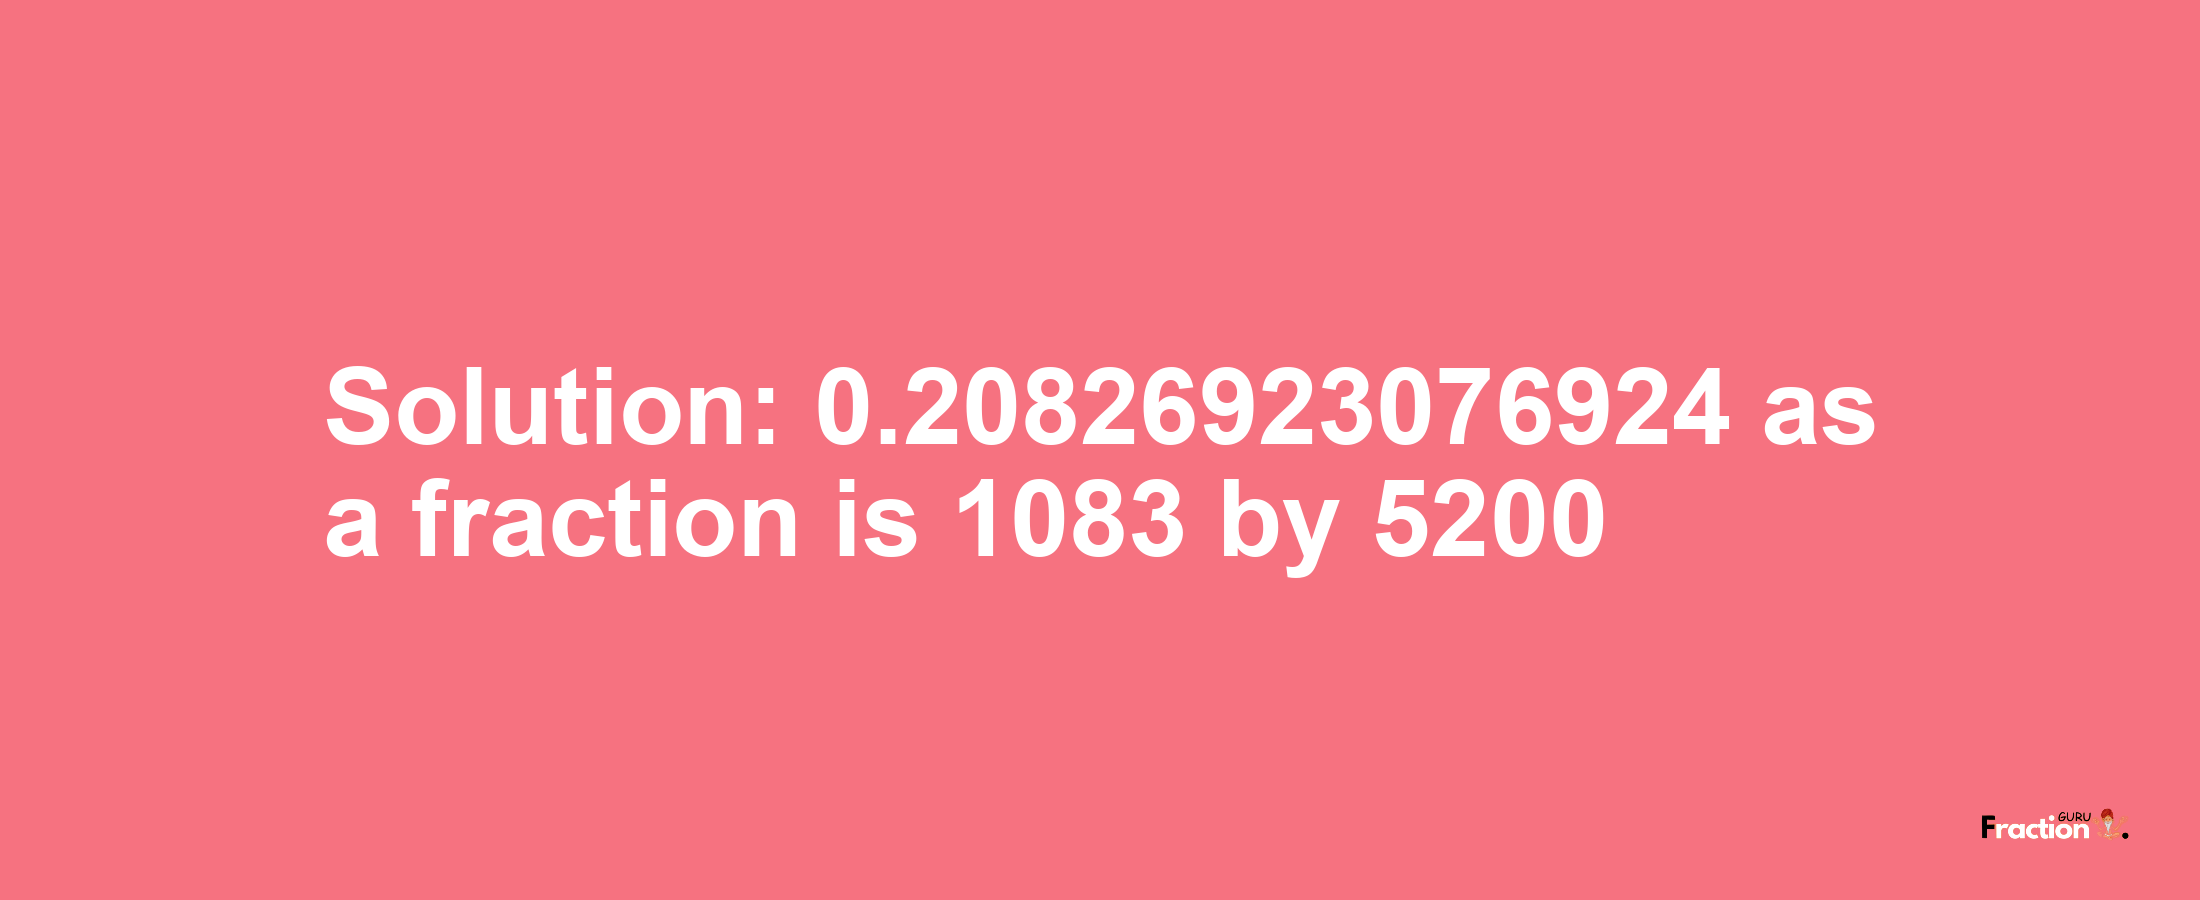 Solution:0.20826923076924 as a fraction is 1083/5200